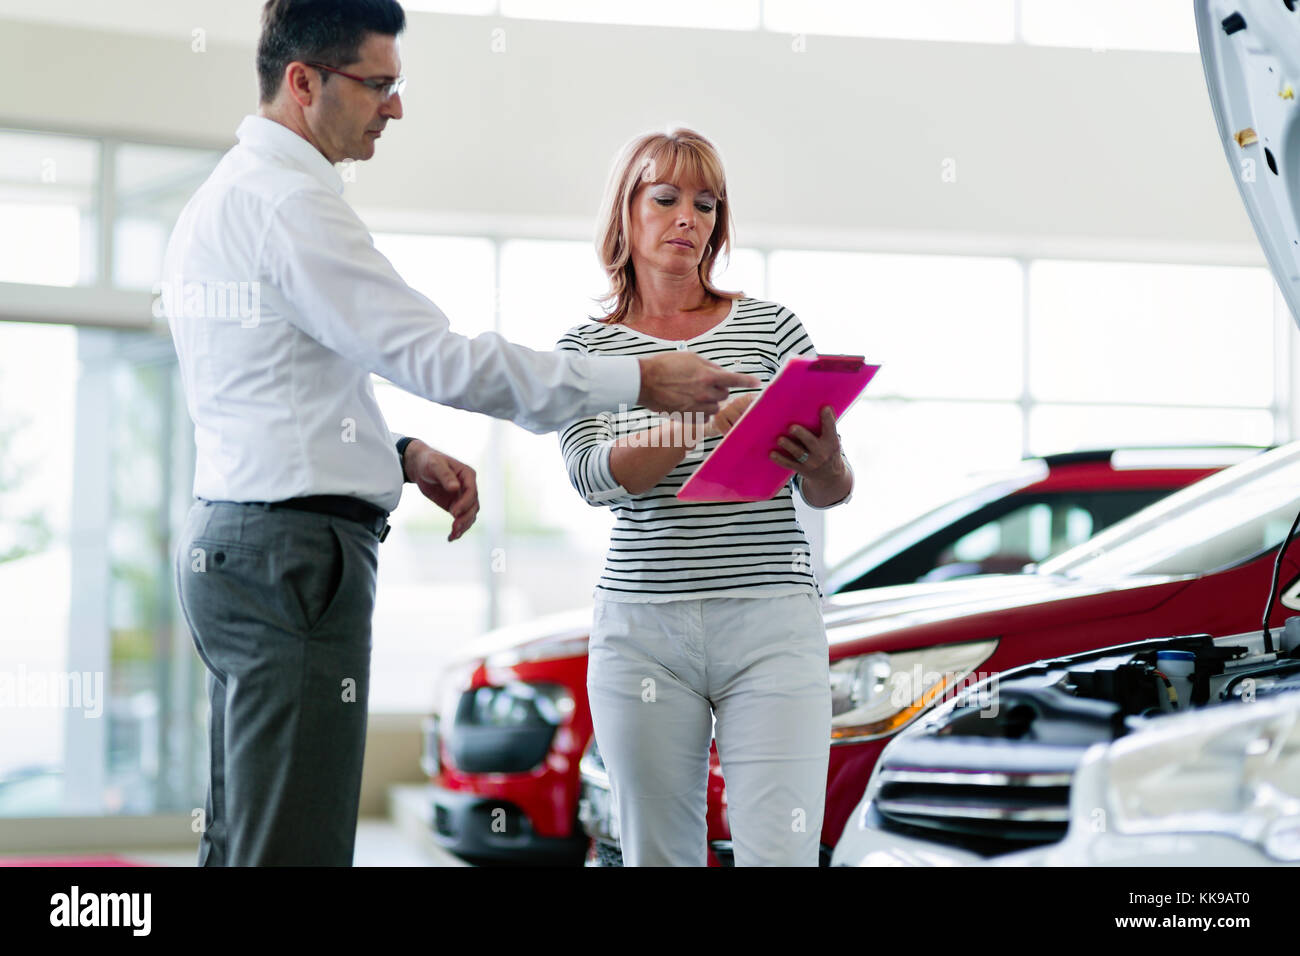 Professional salesperson selling cars at dealership to buyer Stock Photo